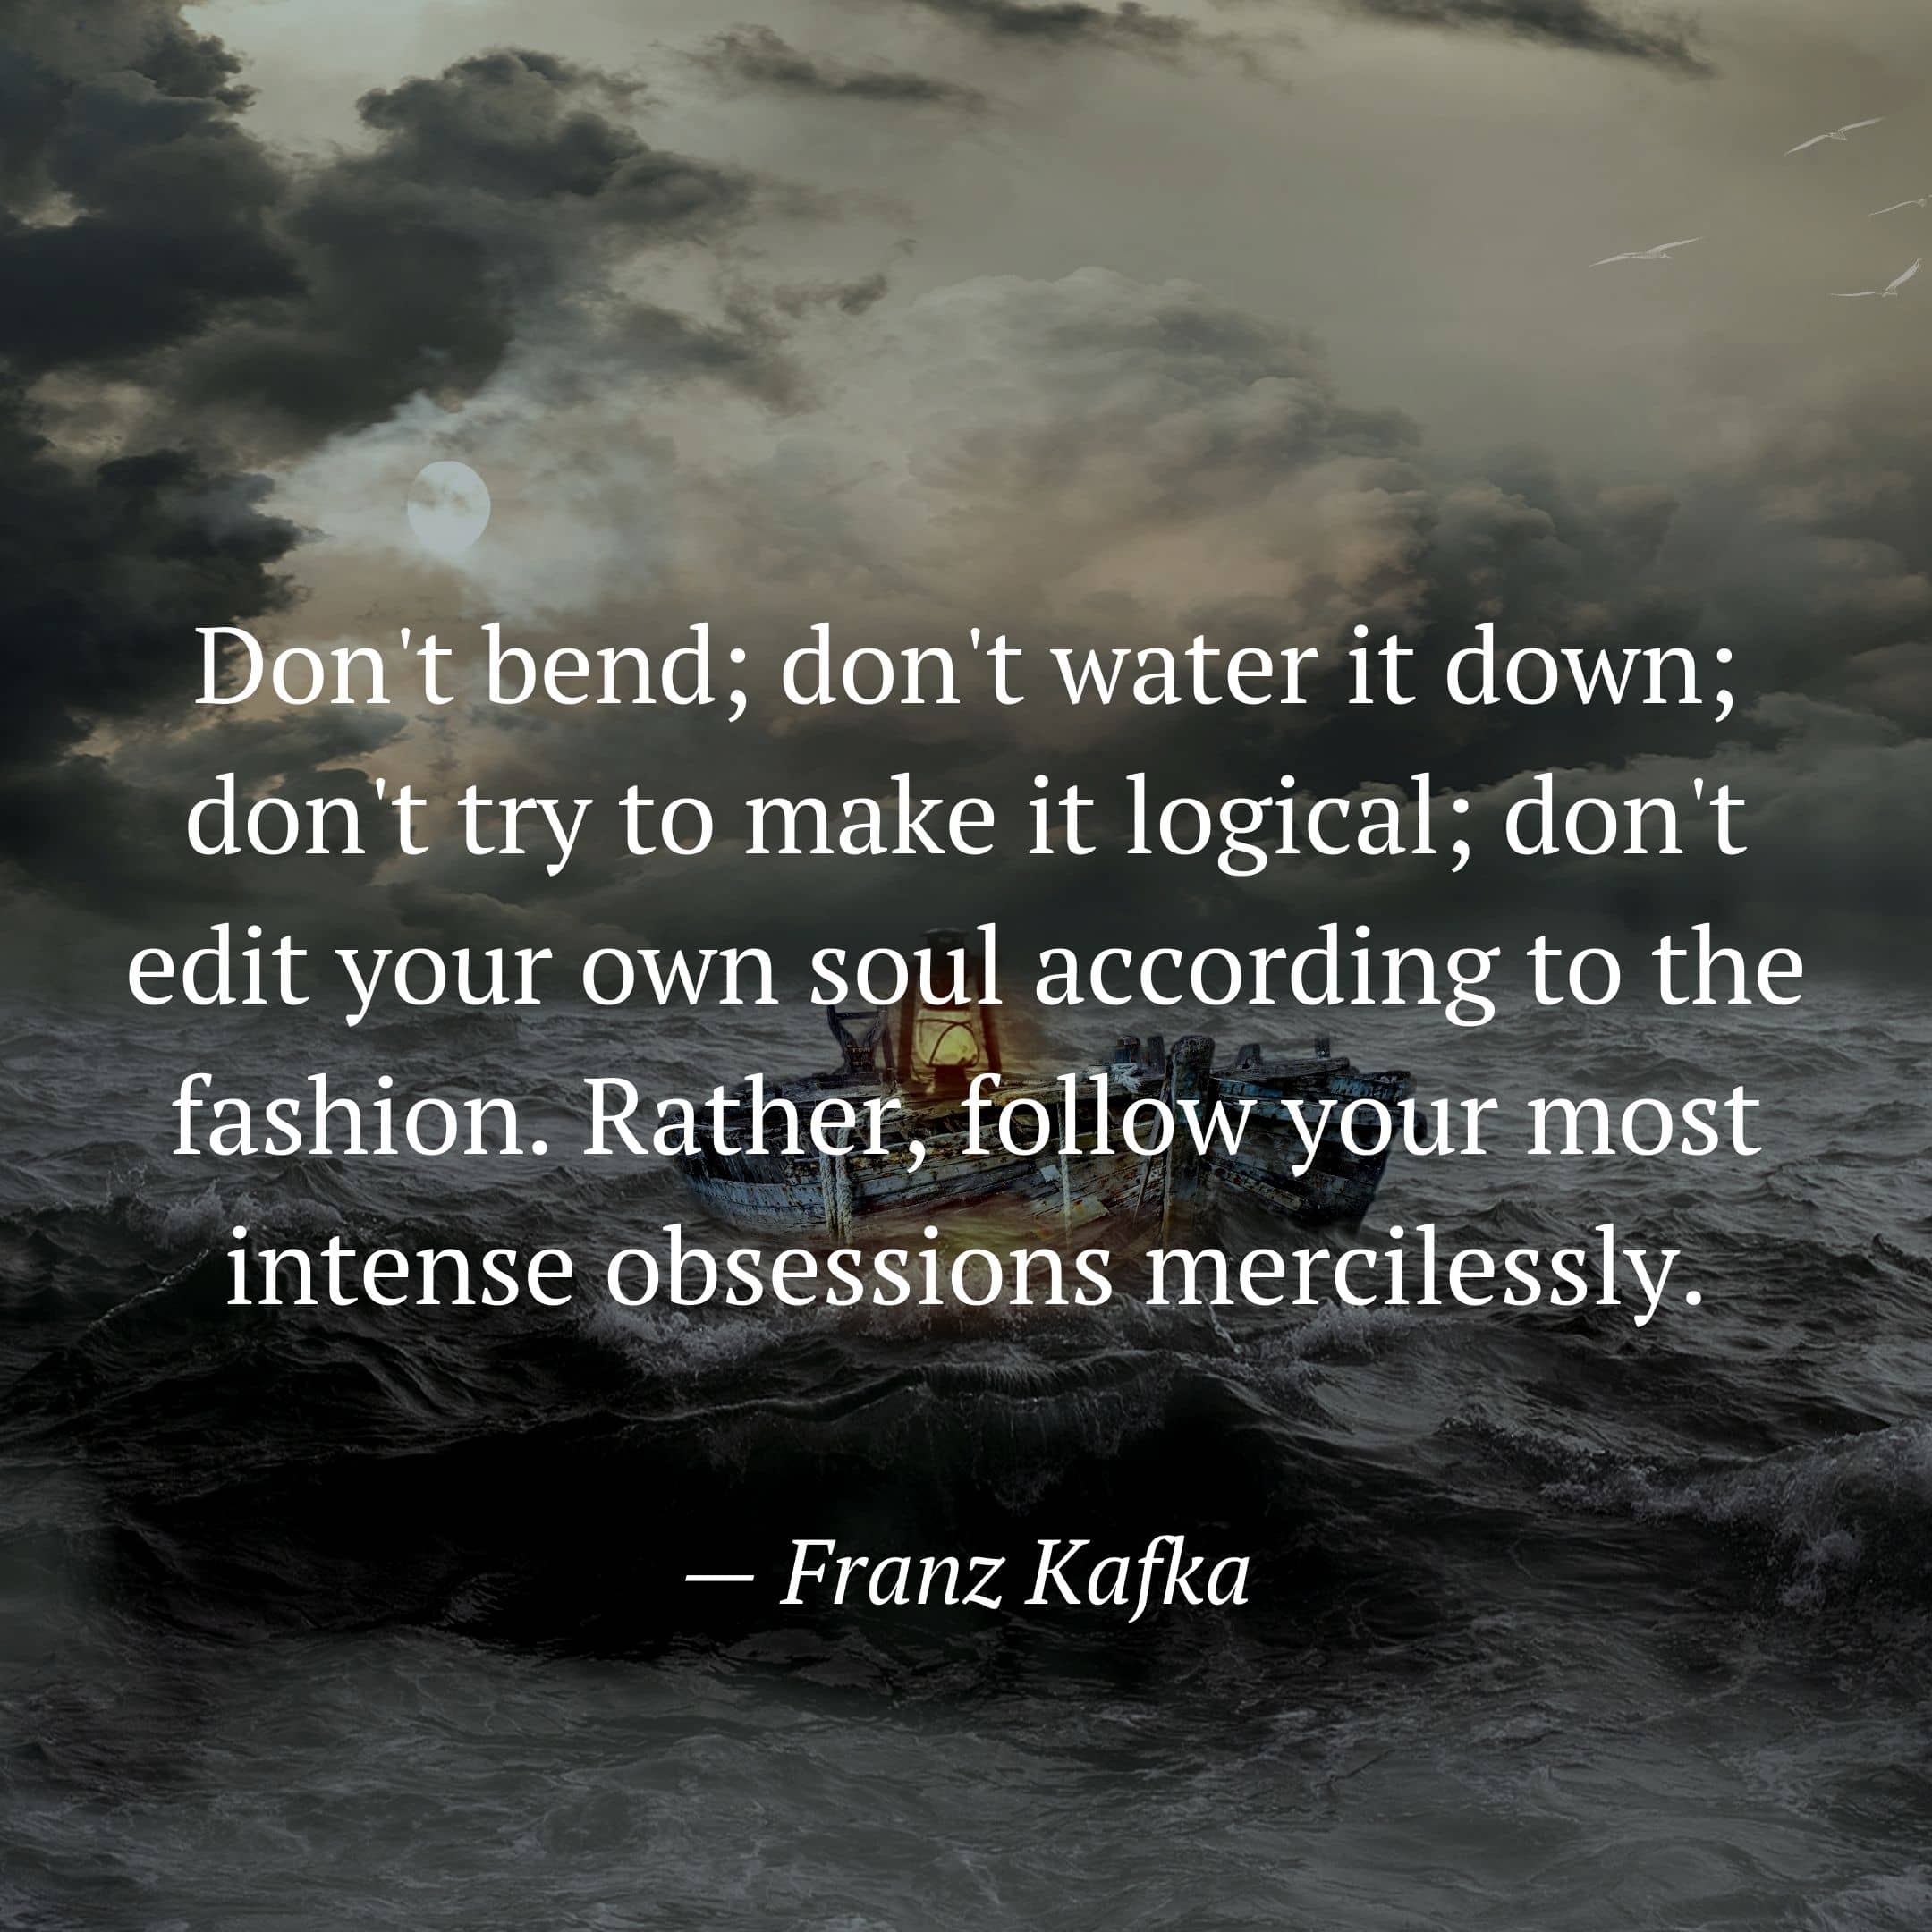 Don't bend; don't water it down; don't try to make it logical; don't edit your own soul according to the fashion. Rather, follow your most intense obsessions mercilessly. by Franz Kafka